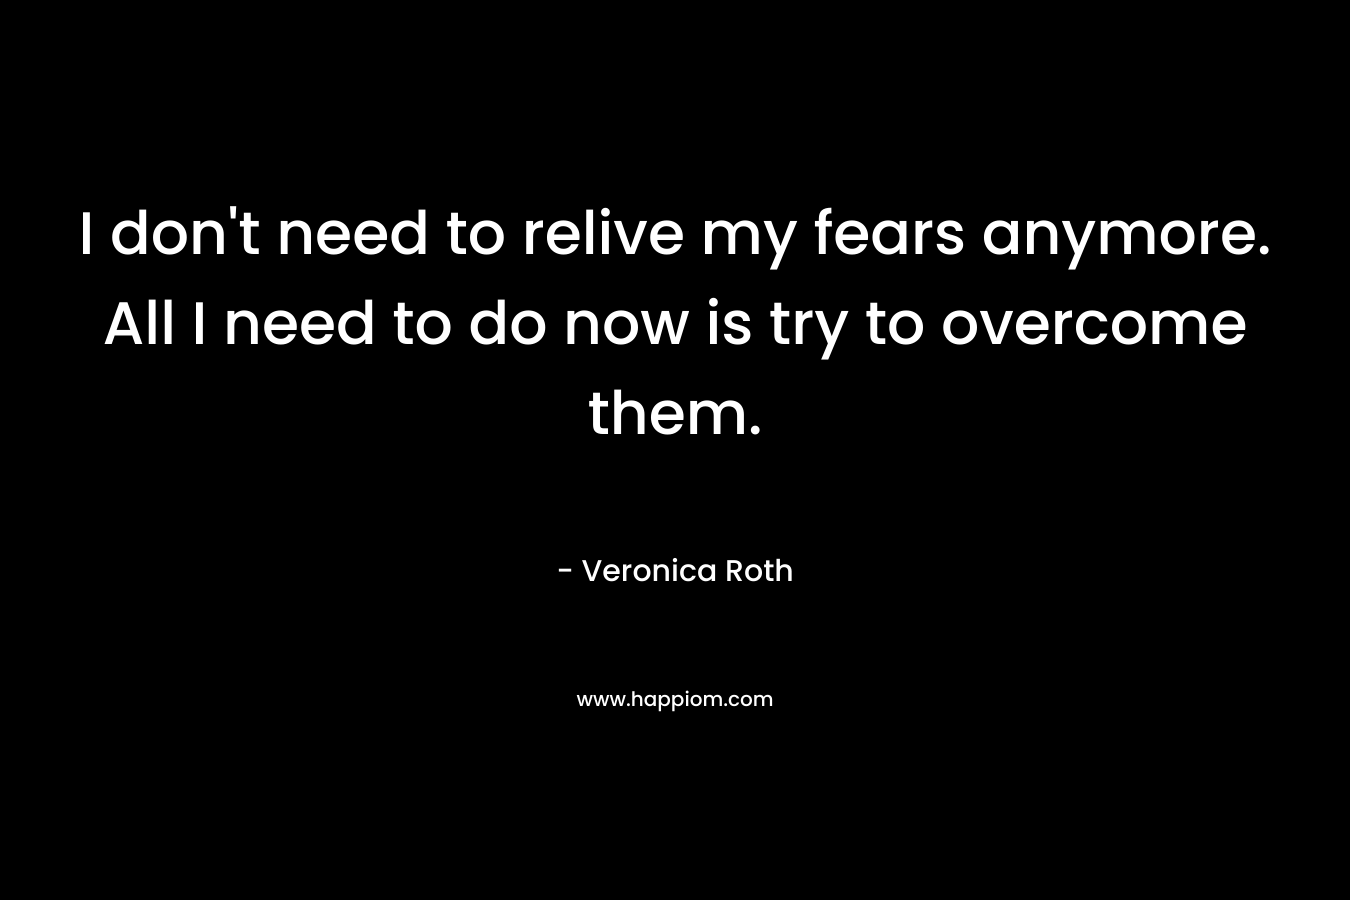 I don’t need to relive my fears anymore. All I need to do now is try to overcome them. – Veronica Roth